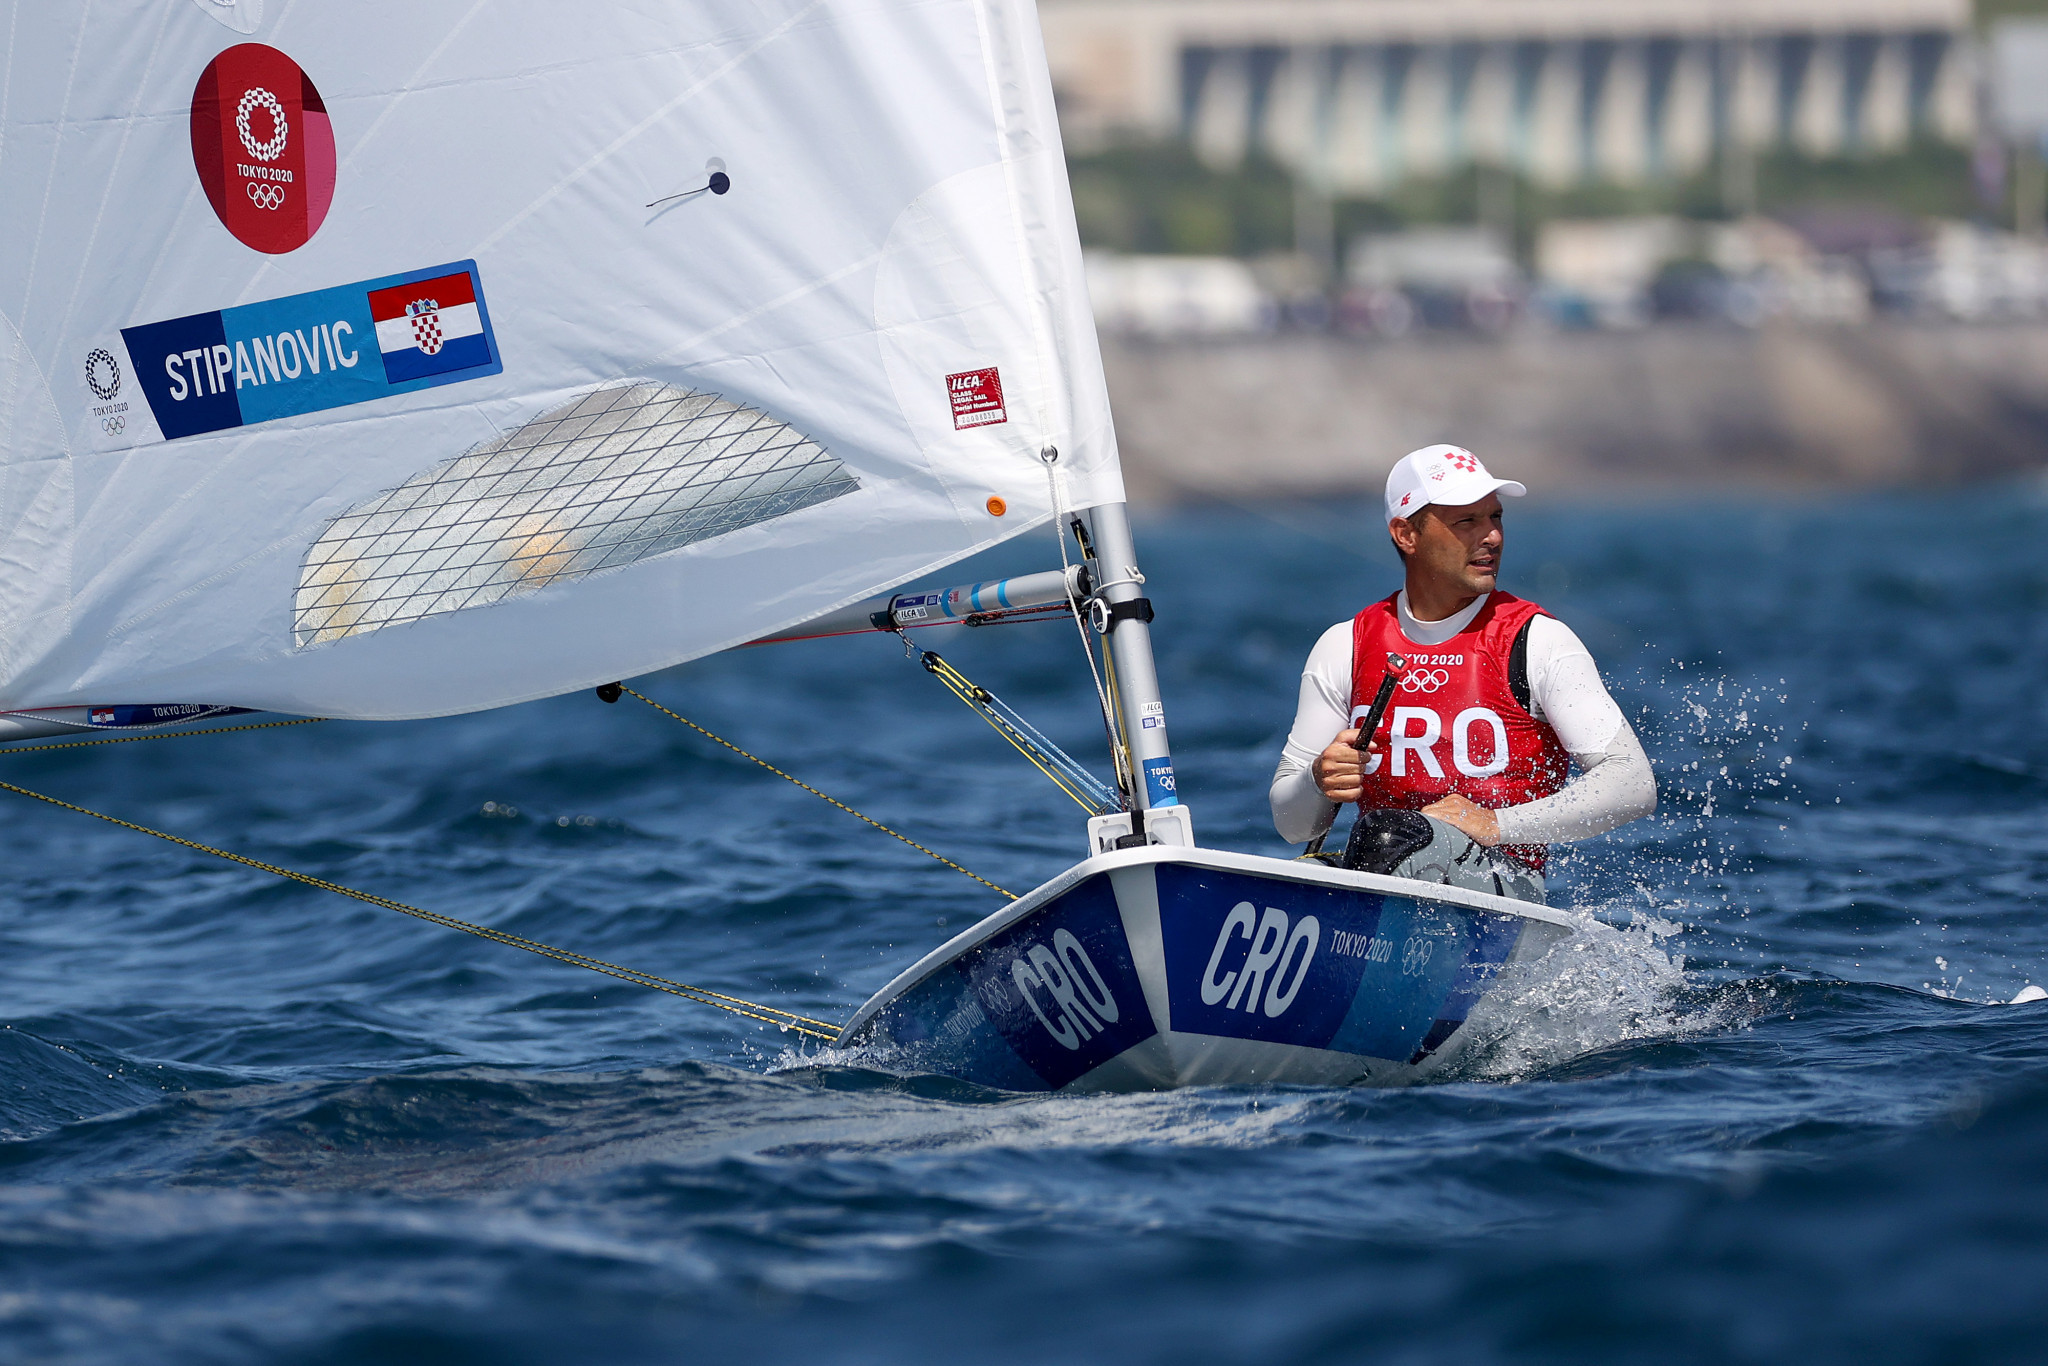 Croatia's Tokyo 2020 Olympic Games silver medallist Tonči Stipanović is competing in Barcelona ©Getty Images